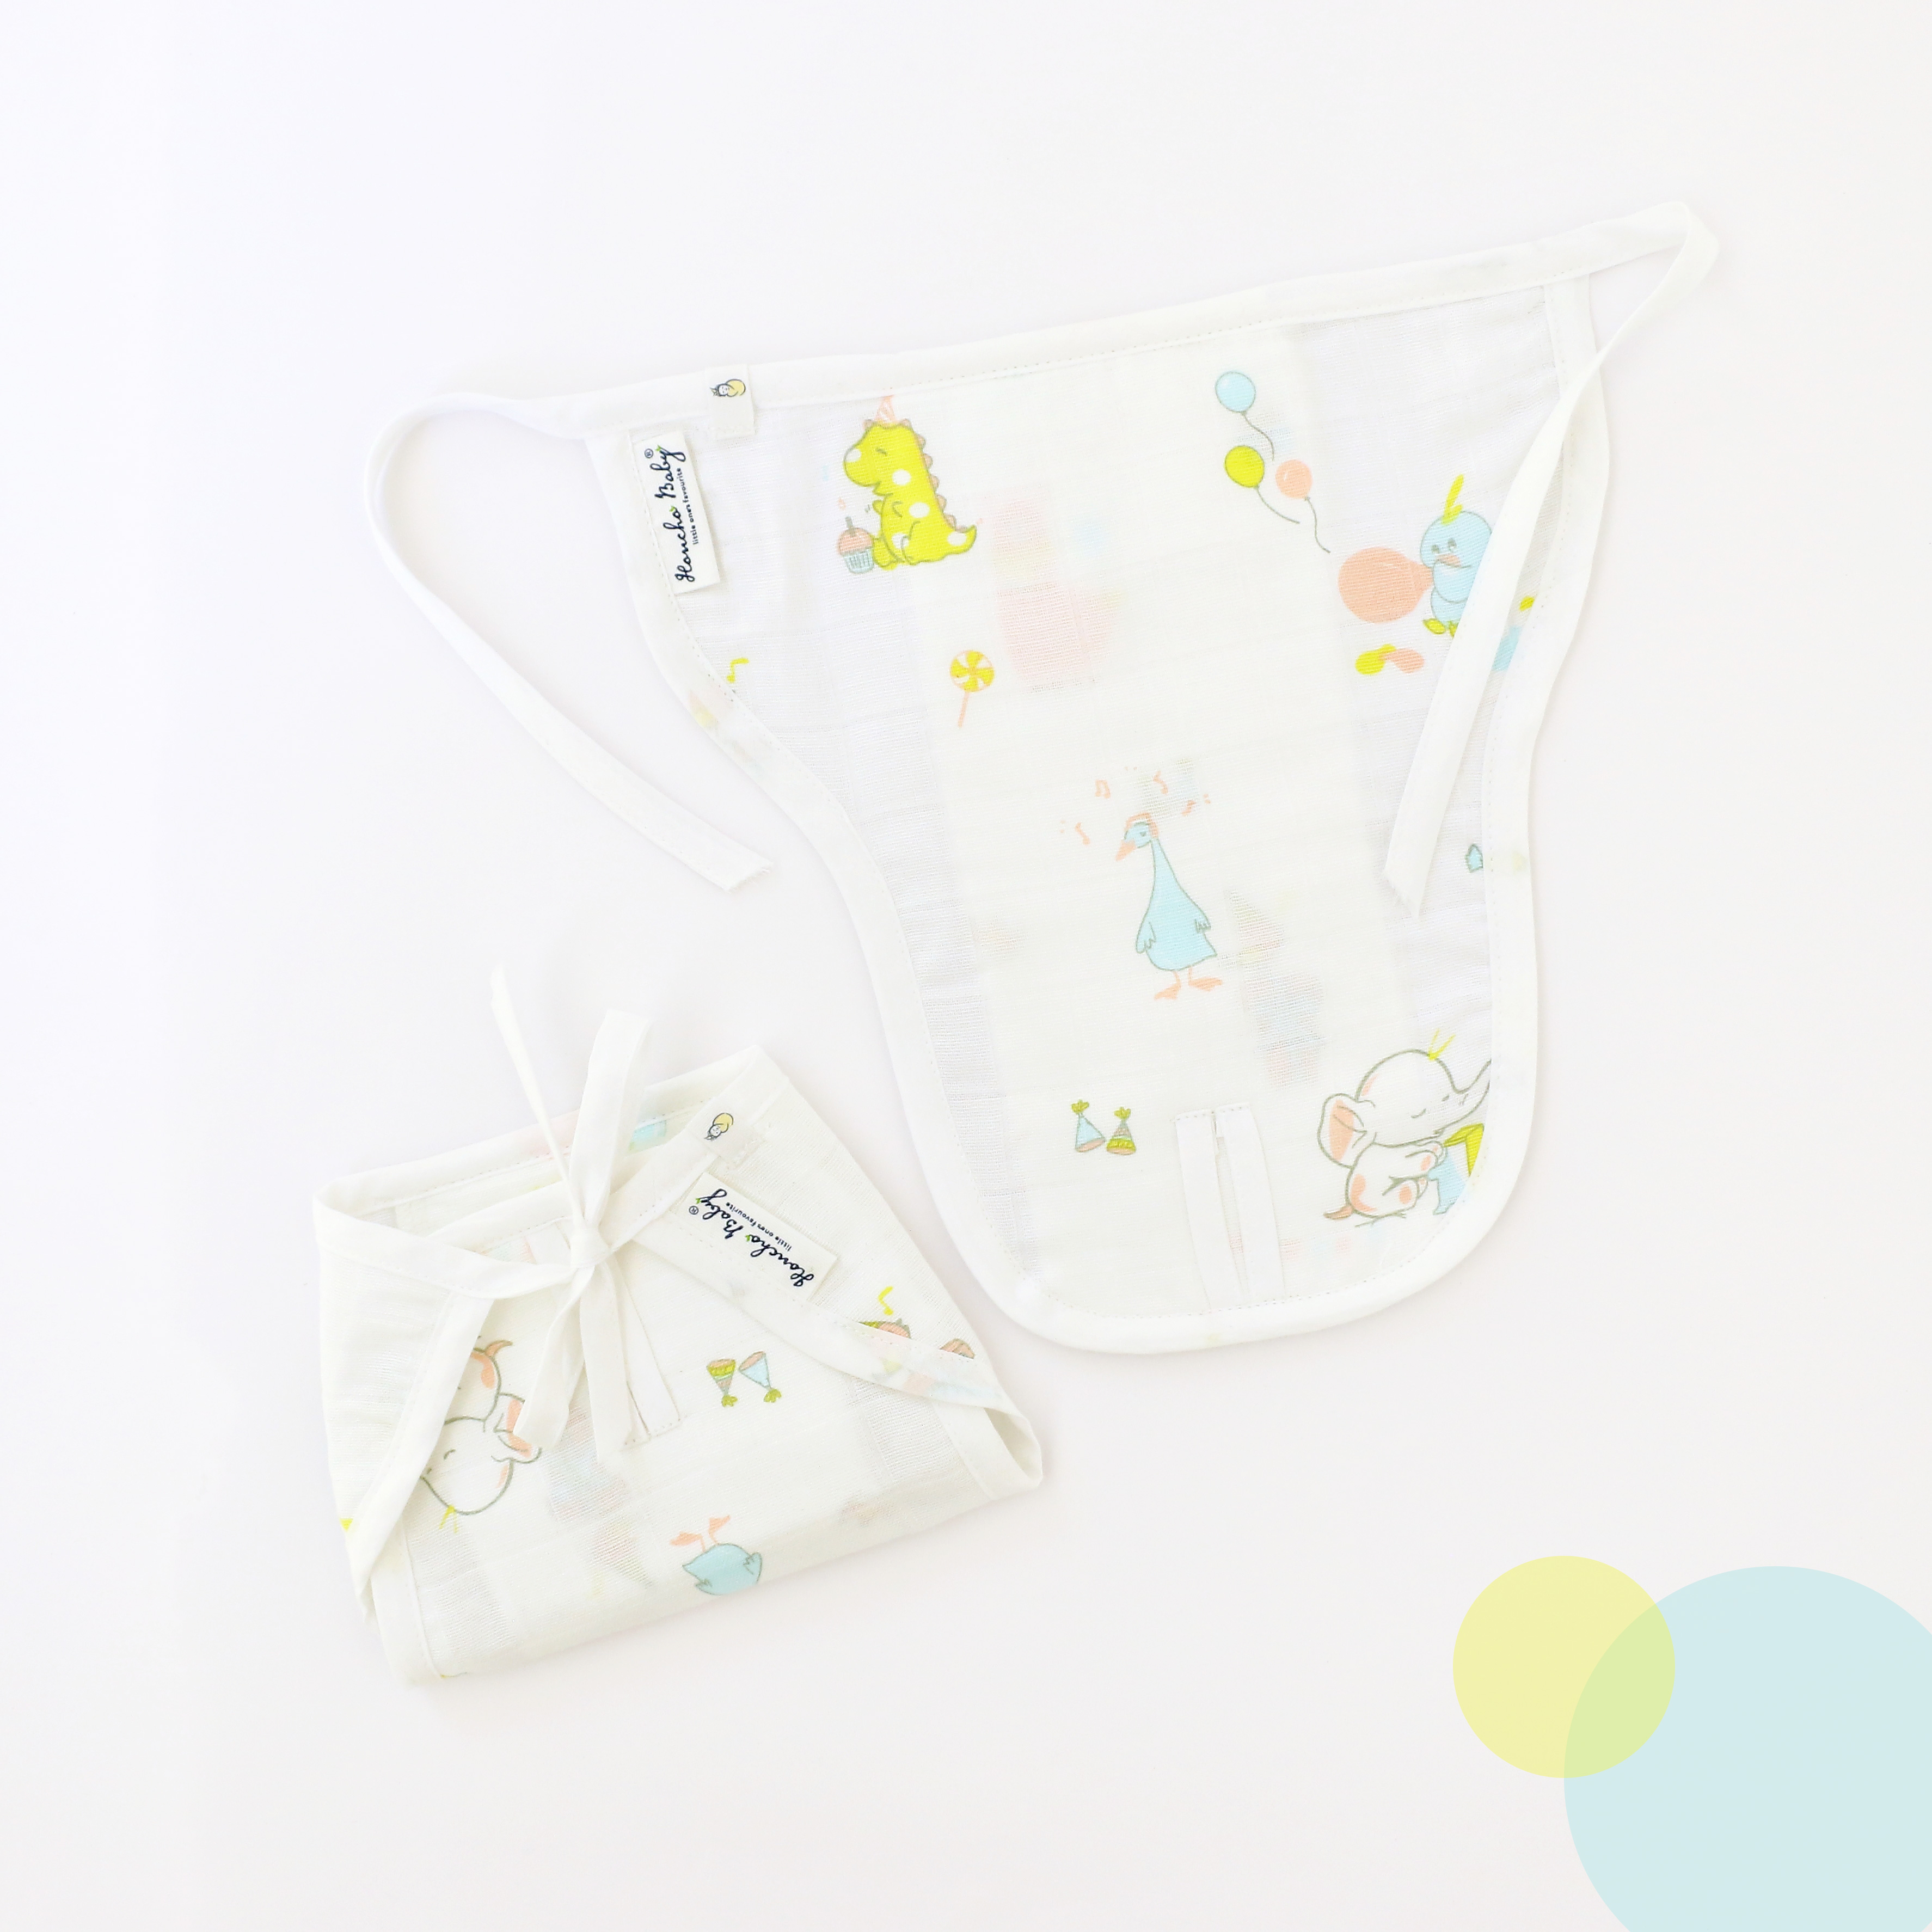 New-Reusable Muslin Nappies / Langot - 4 Layered Central Panel - Assorted combo Pack of 5 & 10